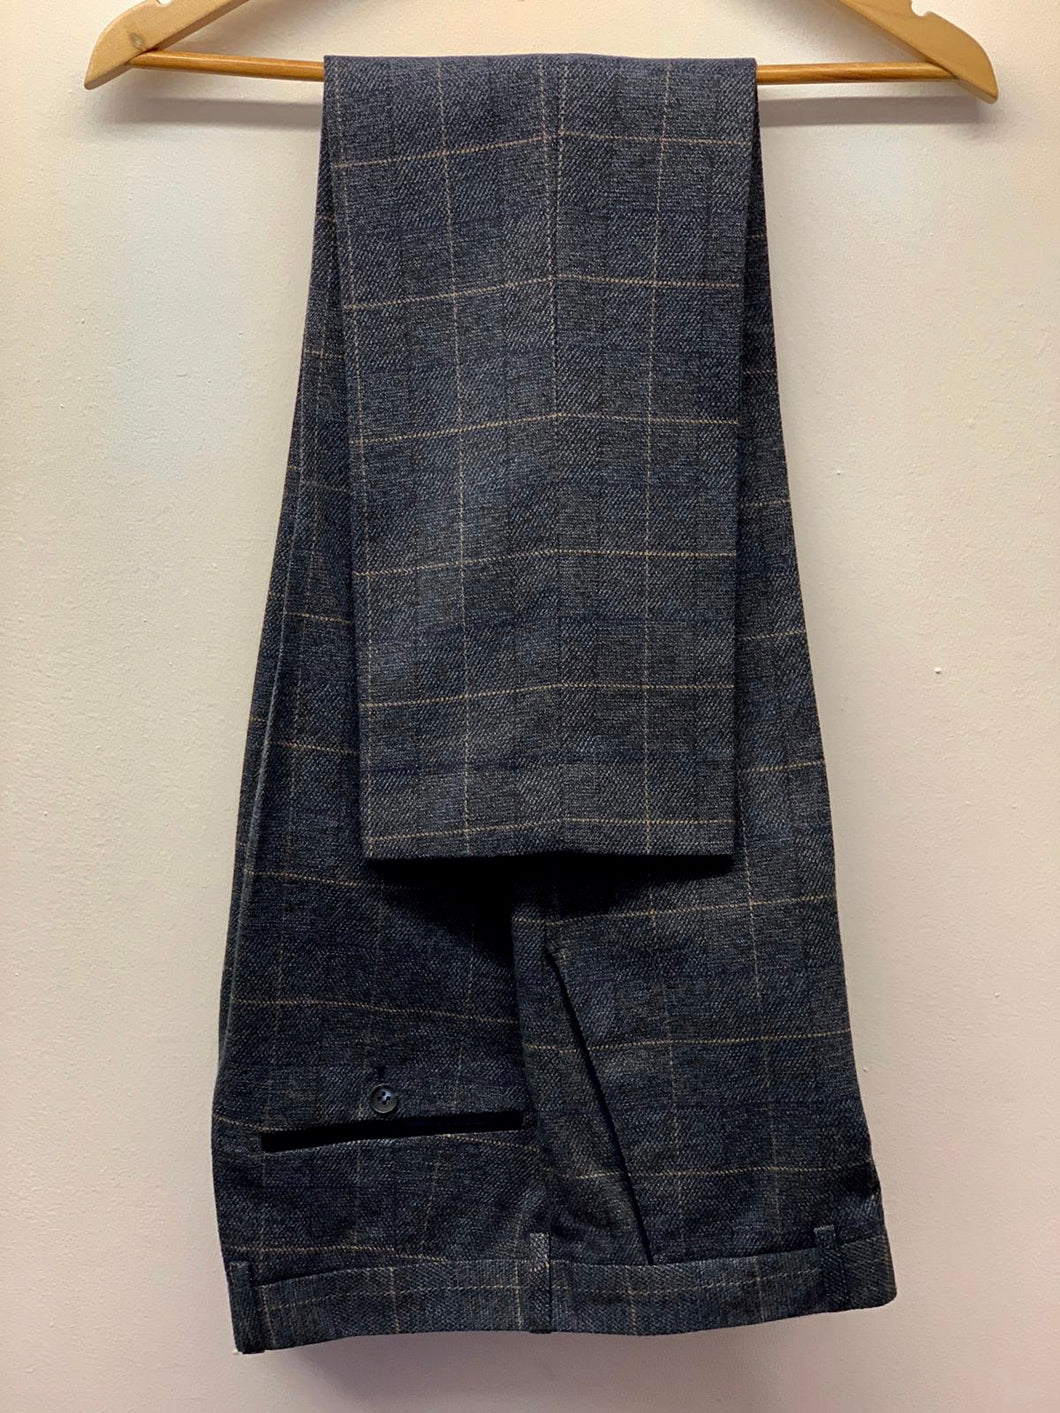 Marc Darcy Scott Blue Trousers hung up. Comfortable trousers for business attire or formal occasions.